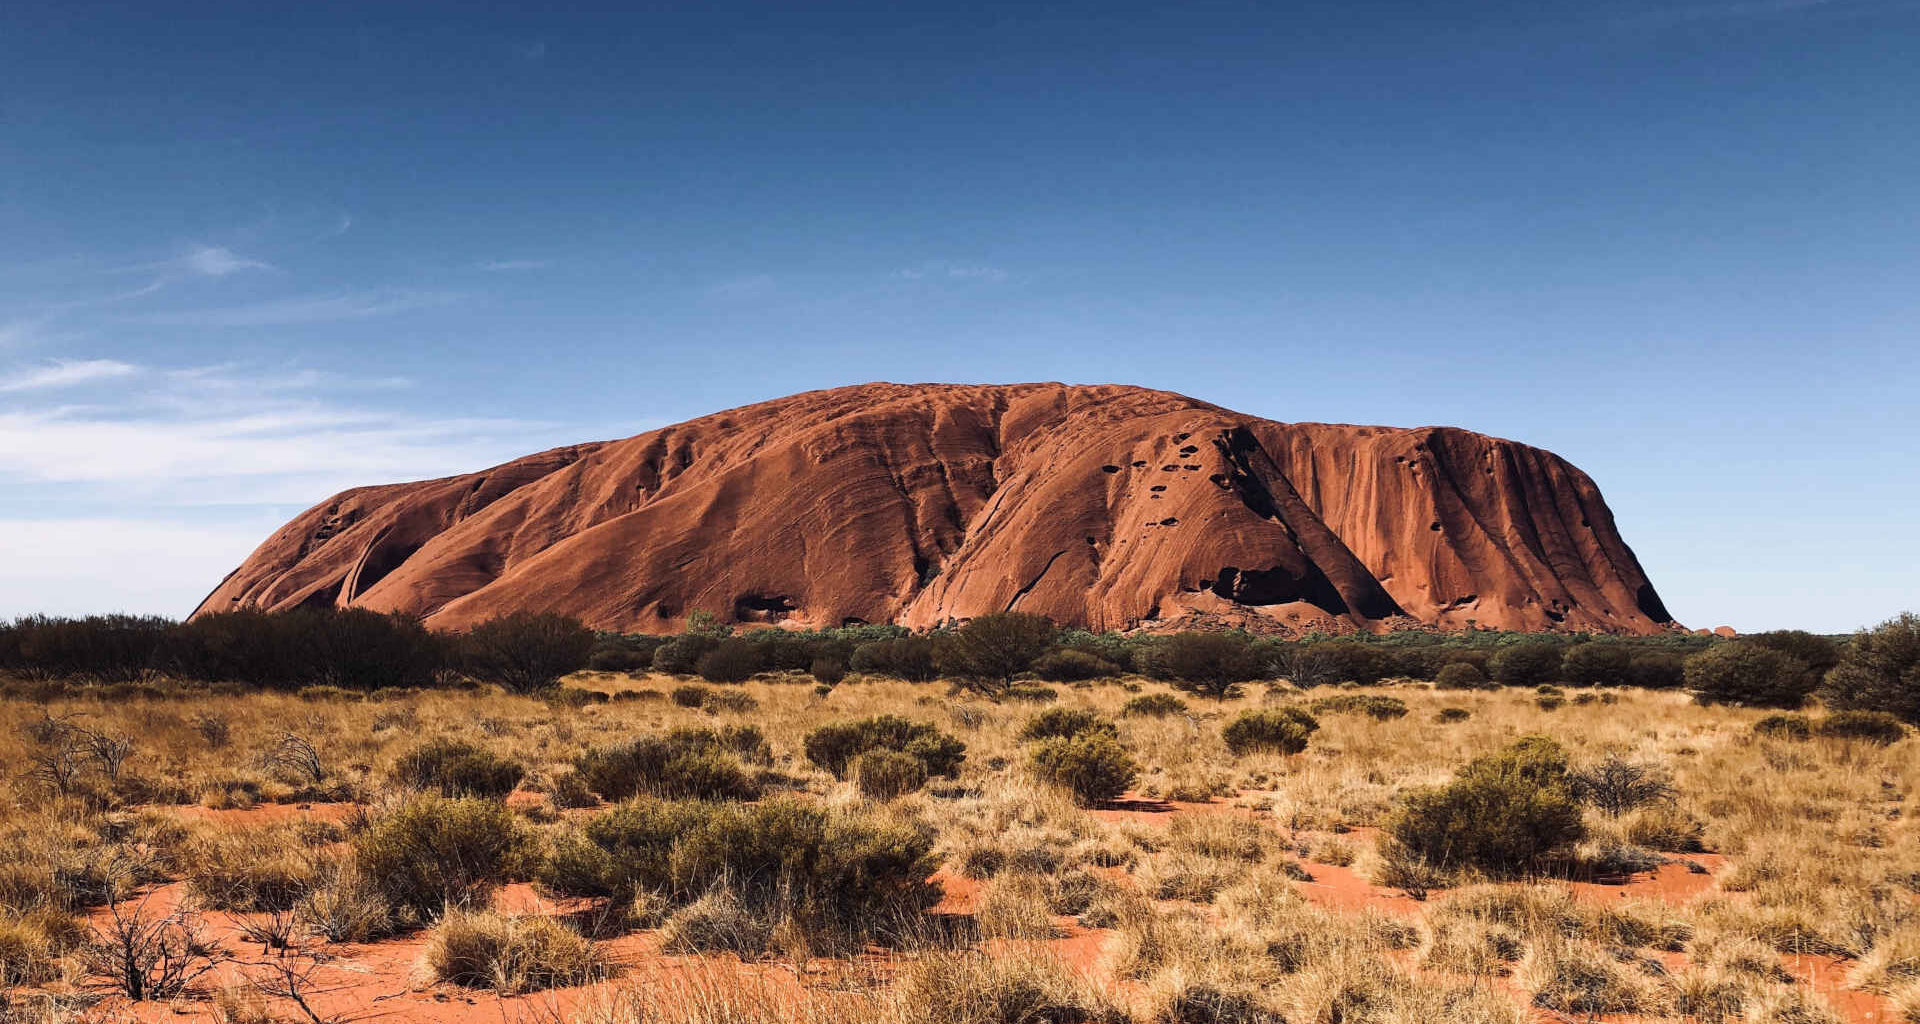 View of Ayers Rock in Australia.